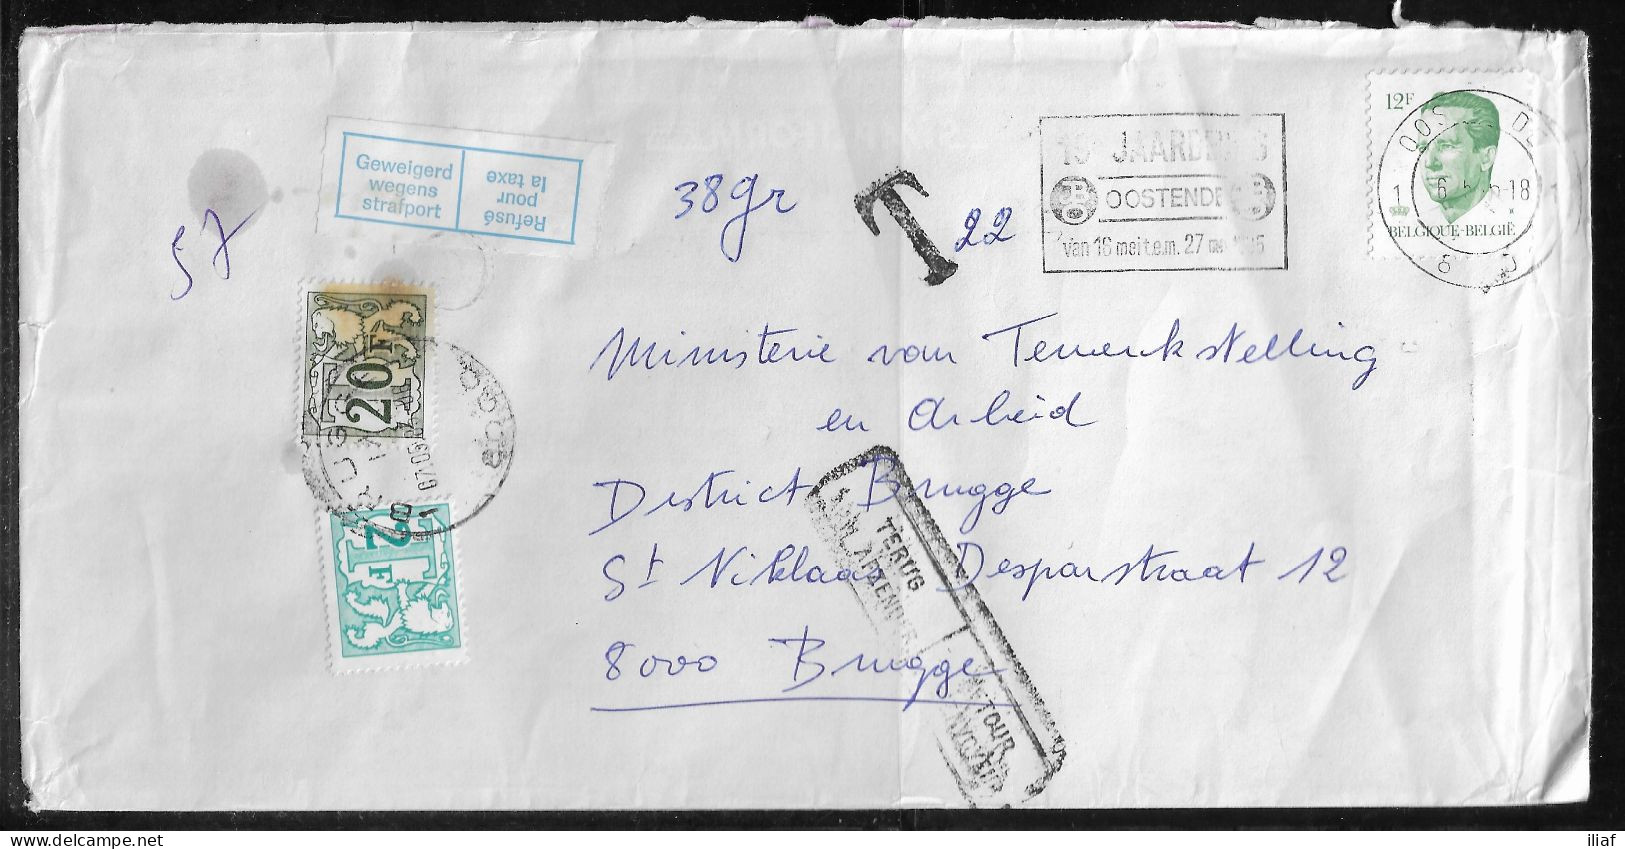 Belgium. Stamps Sc. 1091, J63, J78 On Commercial Letter, Taxed - Postage Due Stamps, Sent From Oostende On 6.05.1985 - Covers & Documents